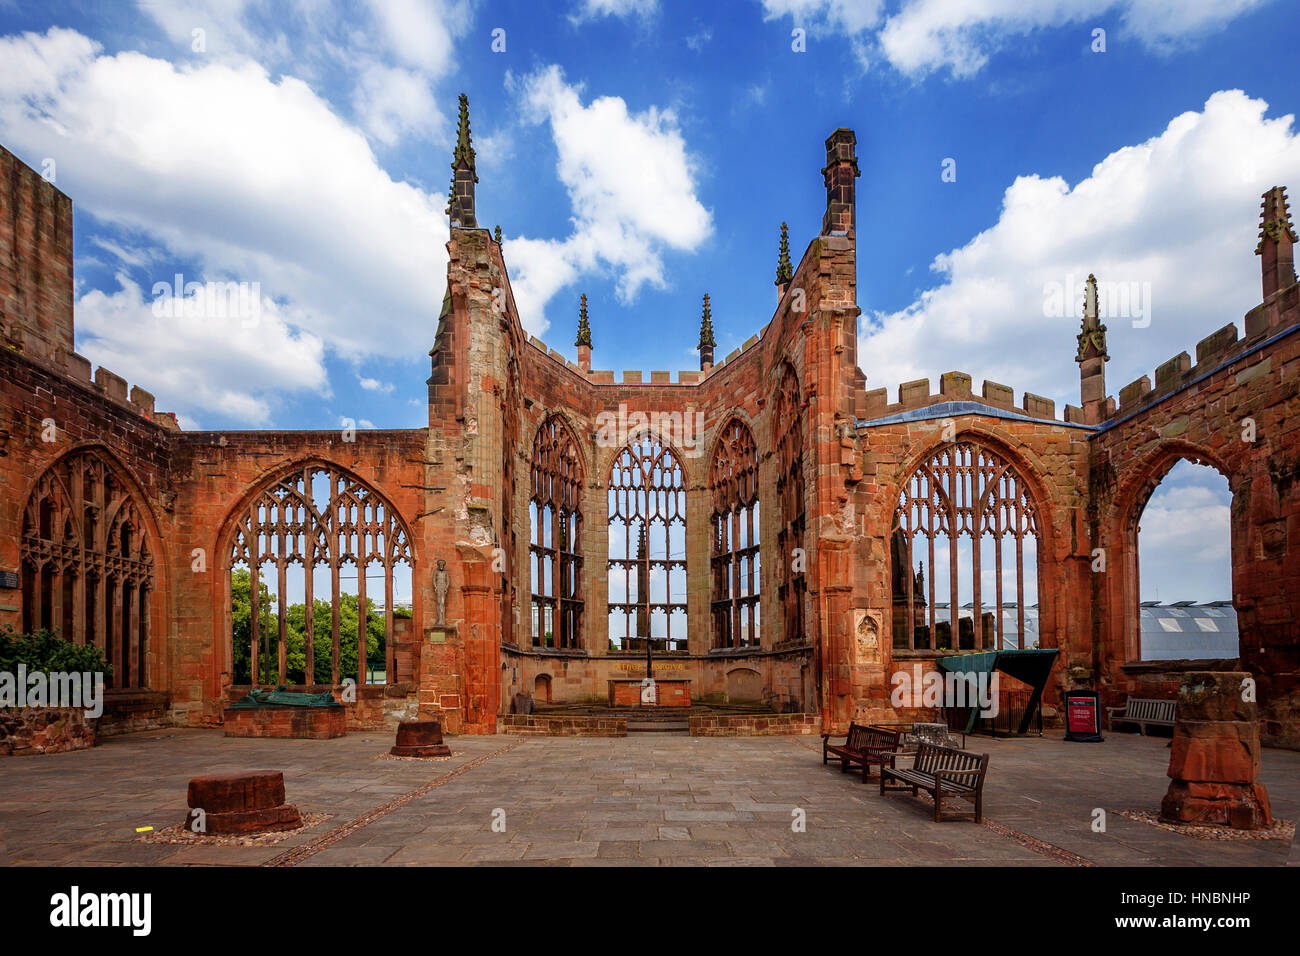 The Ruins of St Michael's Cathedral, Coventry, England, United Kingdom Stock Photo